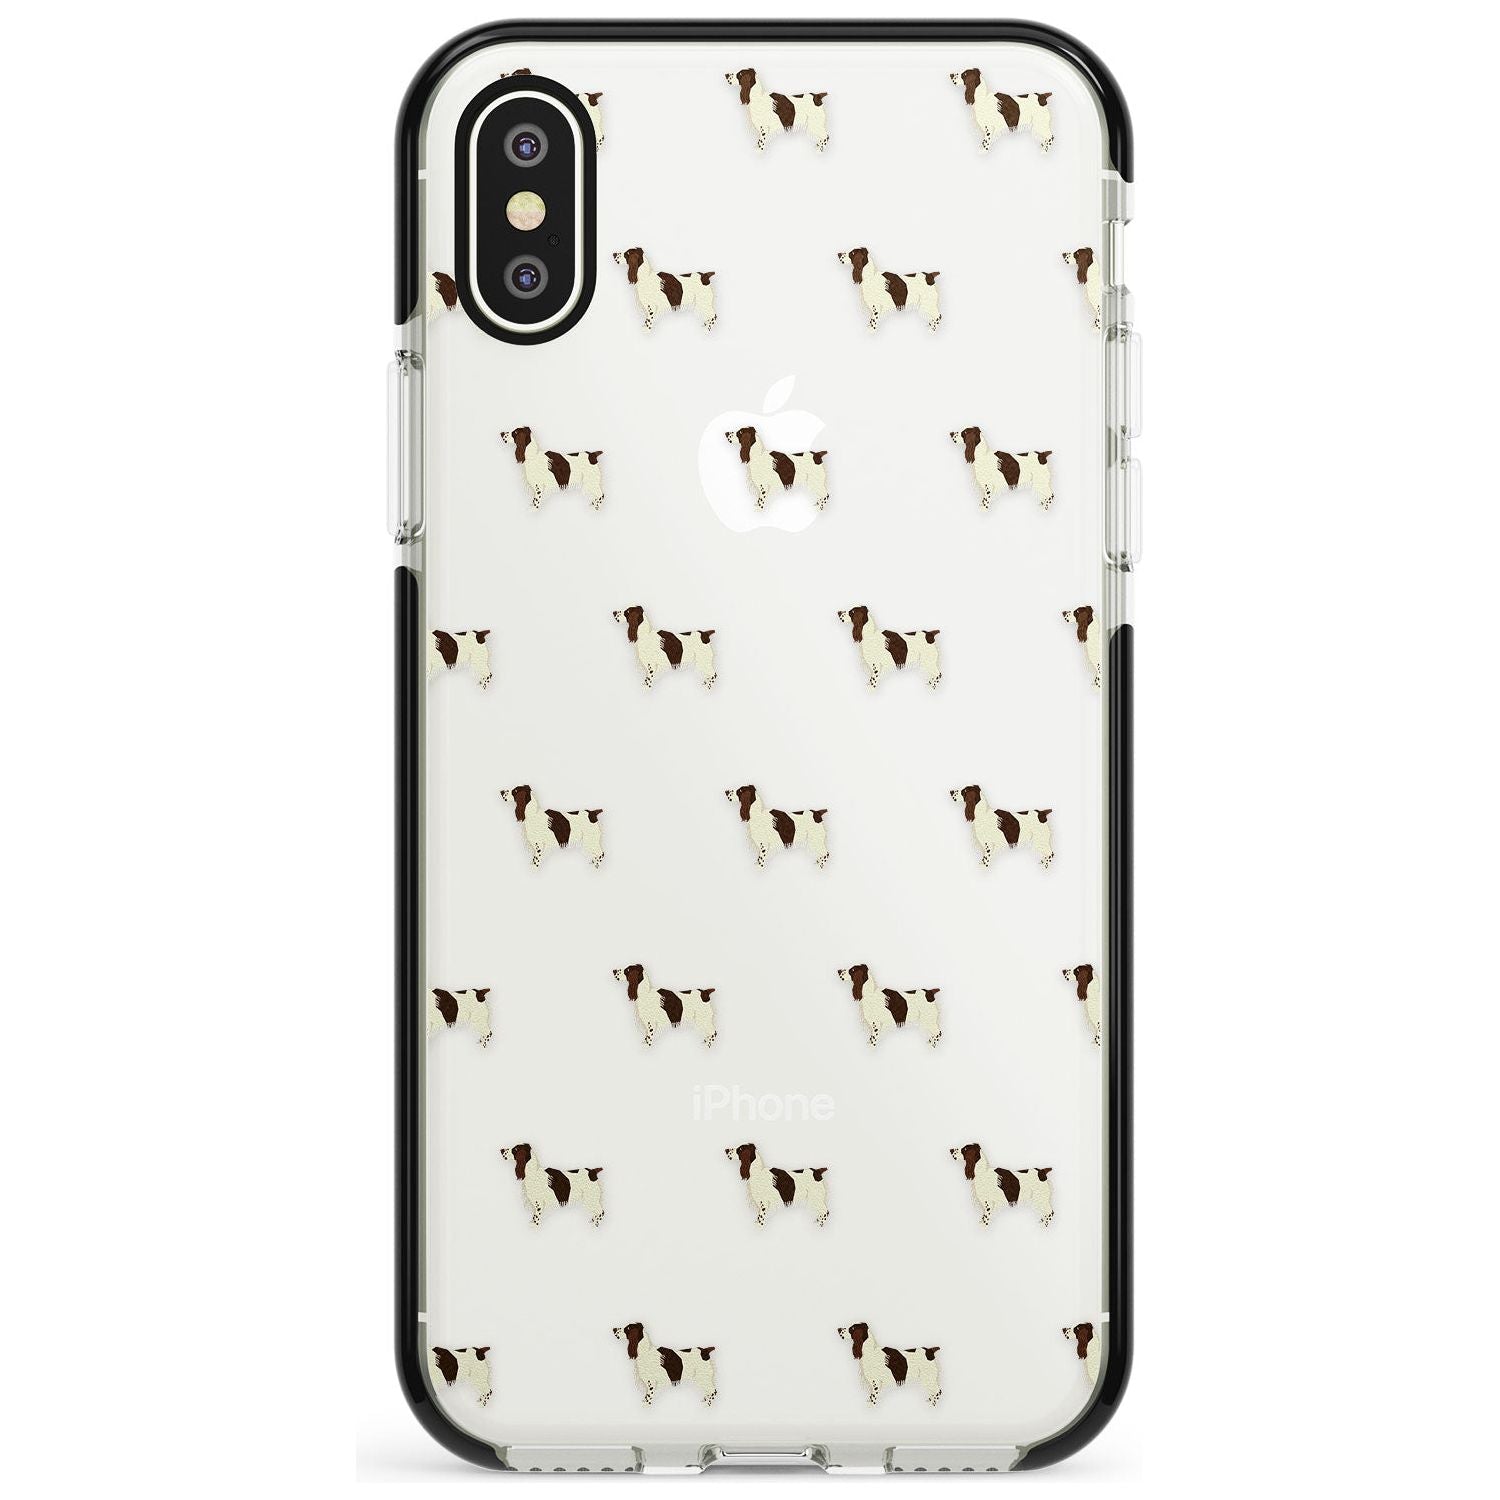 English Springer Spaniel Dog Pattern Clear Black Impact Phone Case for iPhone X XS Max XR